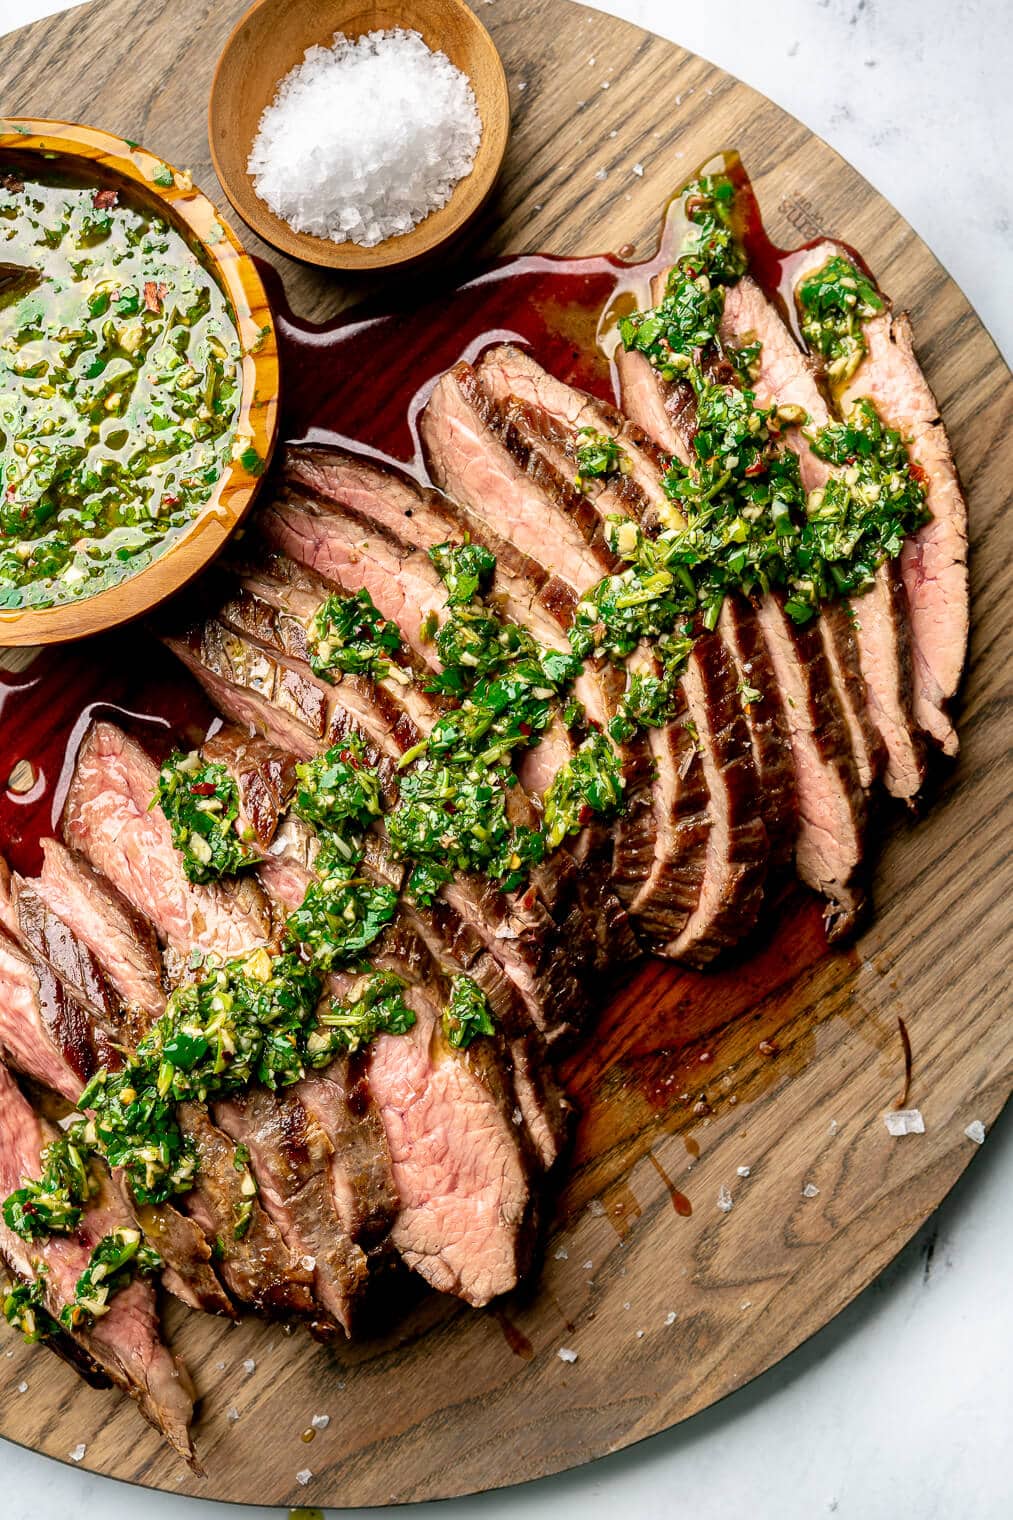 Grilled Flank Steak with Chimichurri